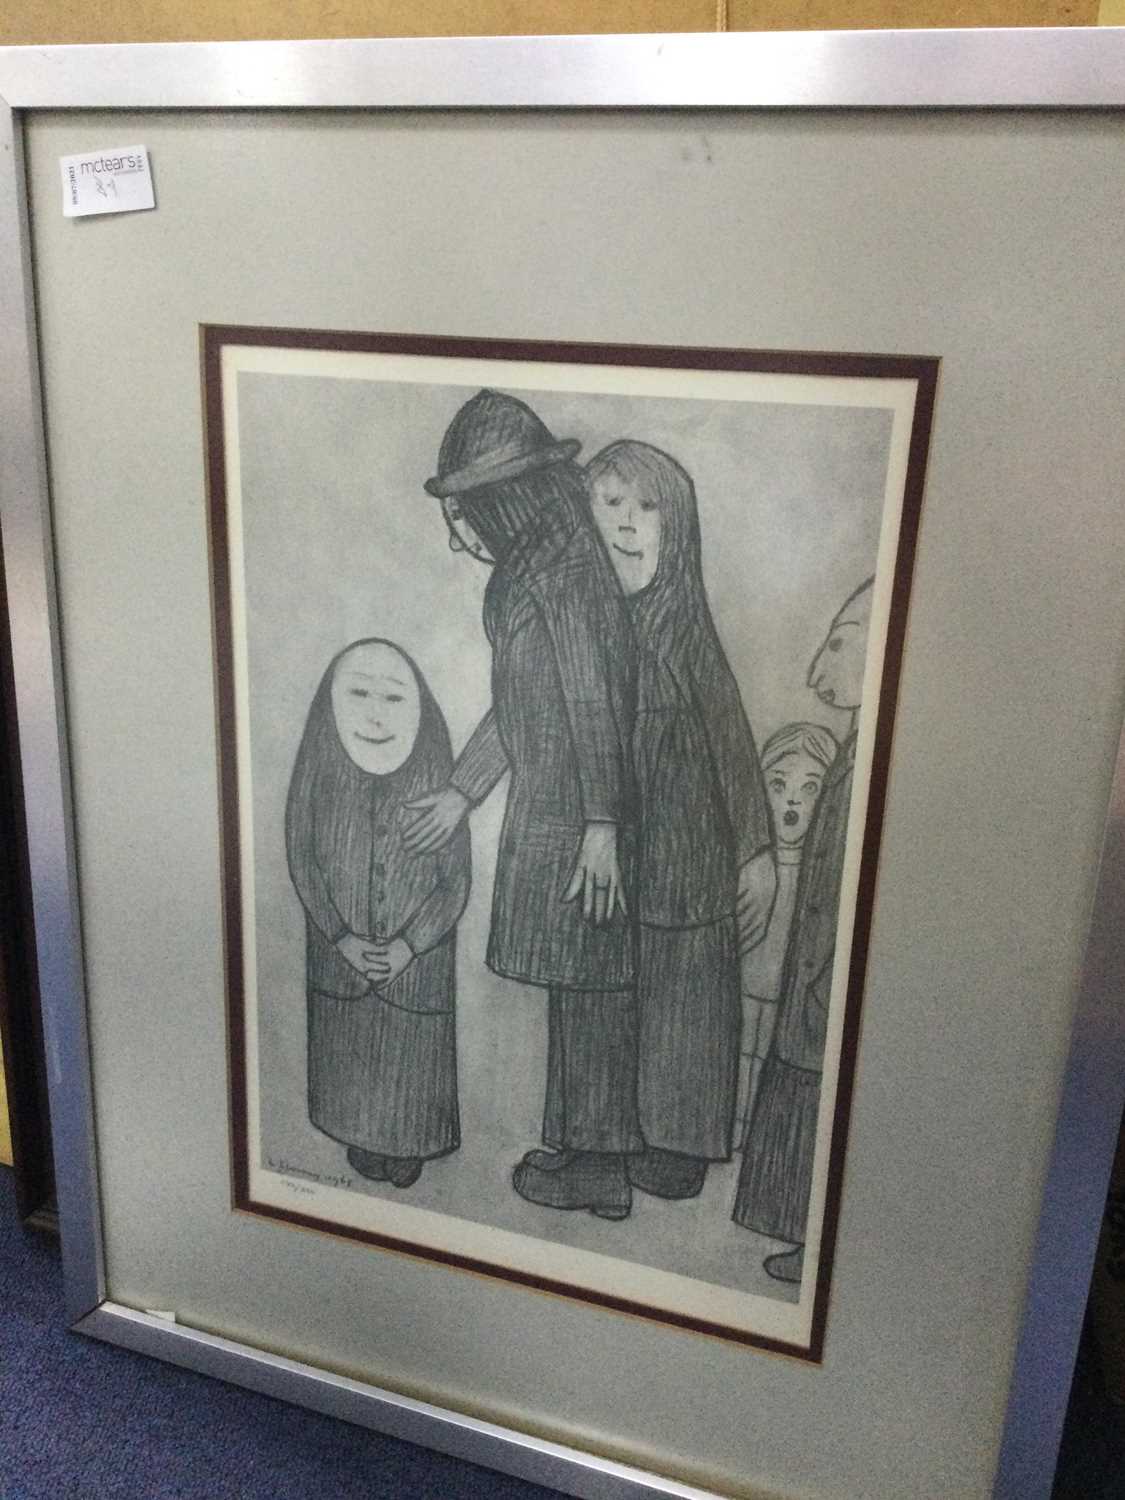 Lot 89 - A LIMITED EDITION PRINT AFTER L.S. LOWRY, ALONG WITH STURGEON, FLINT AND MCINTOSH PATRICK PRINTS